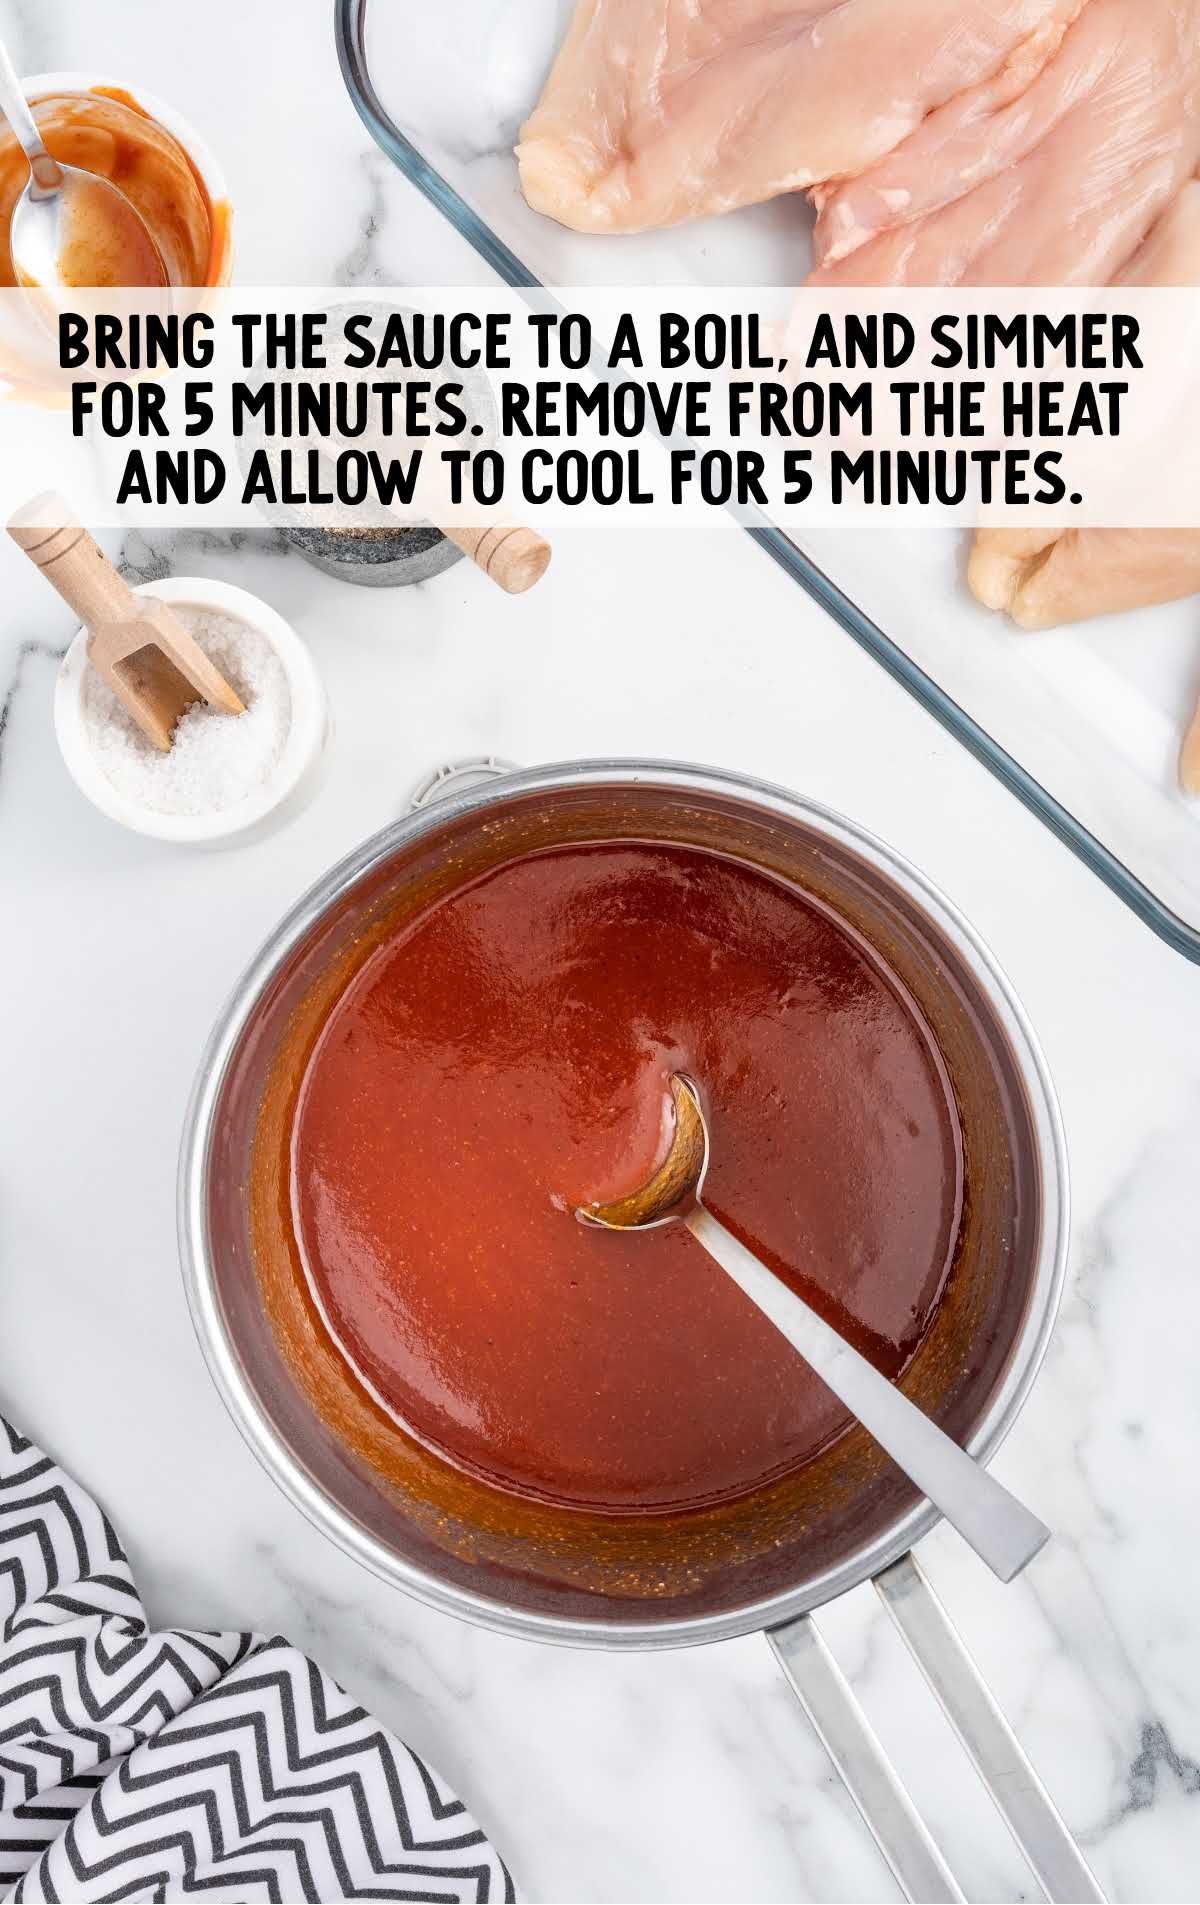 sauce brought to a boil and simmered